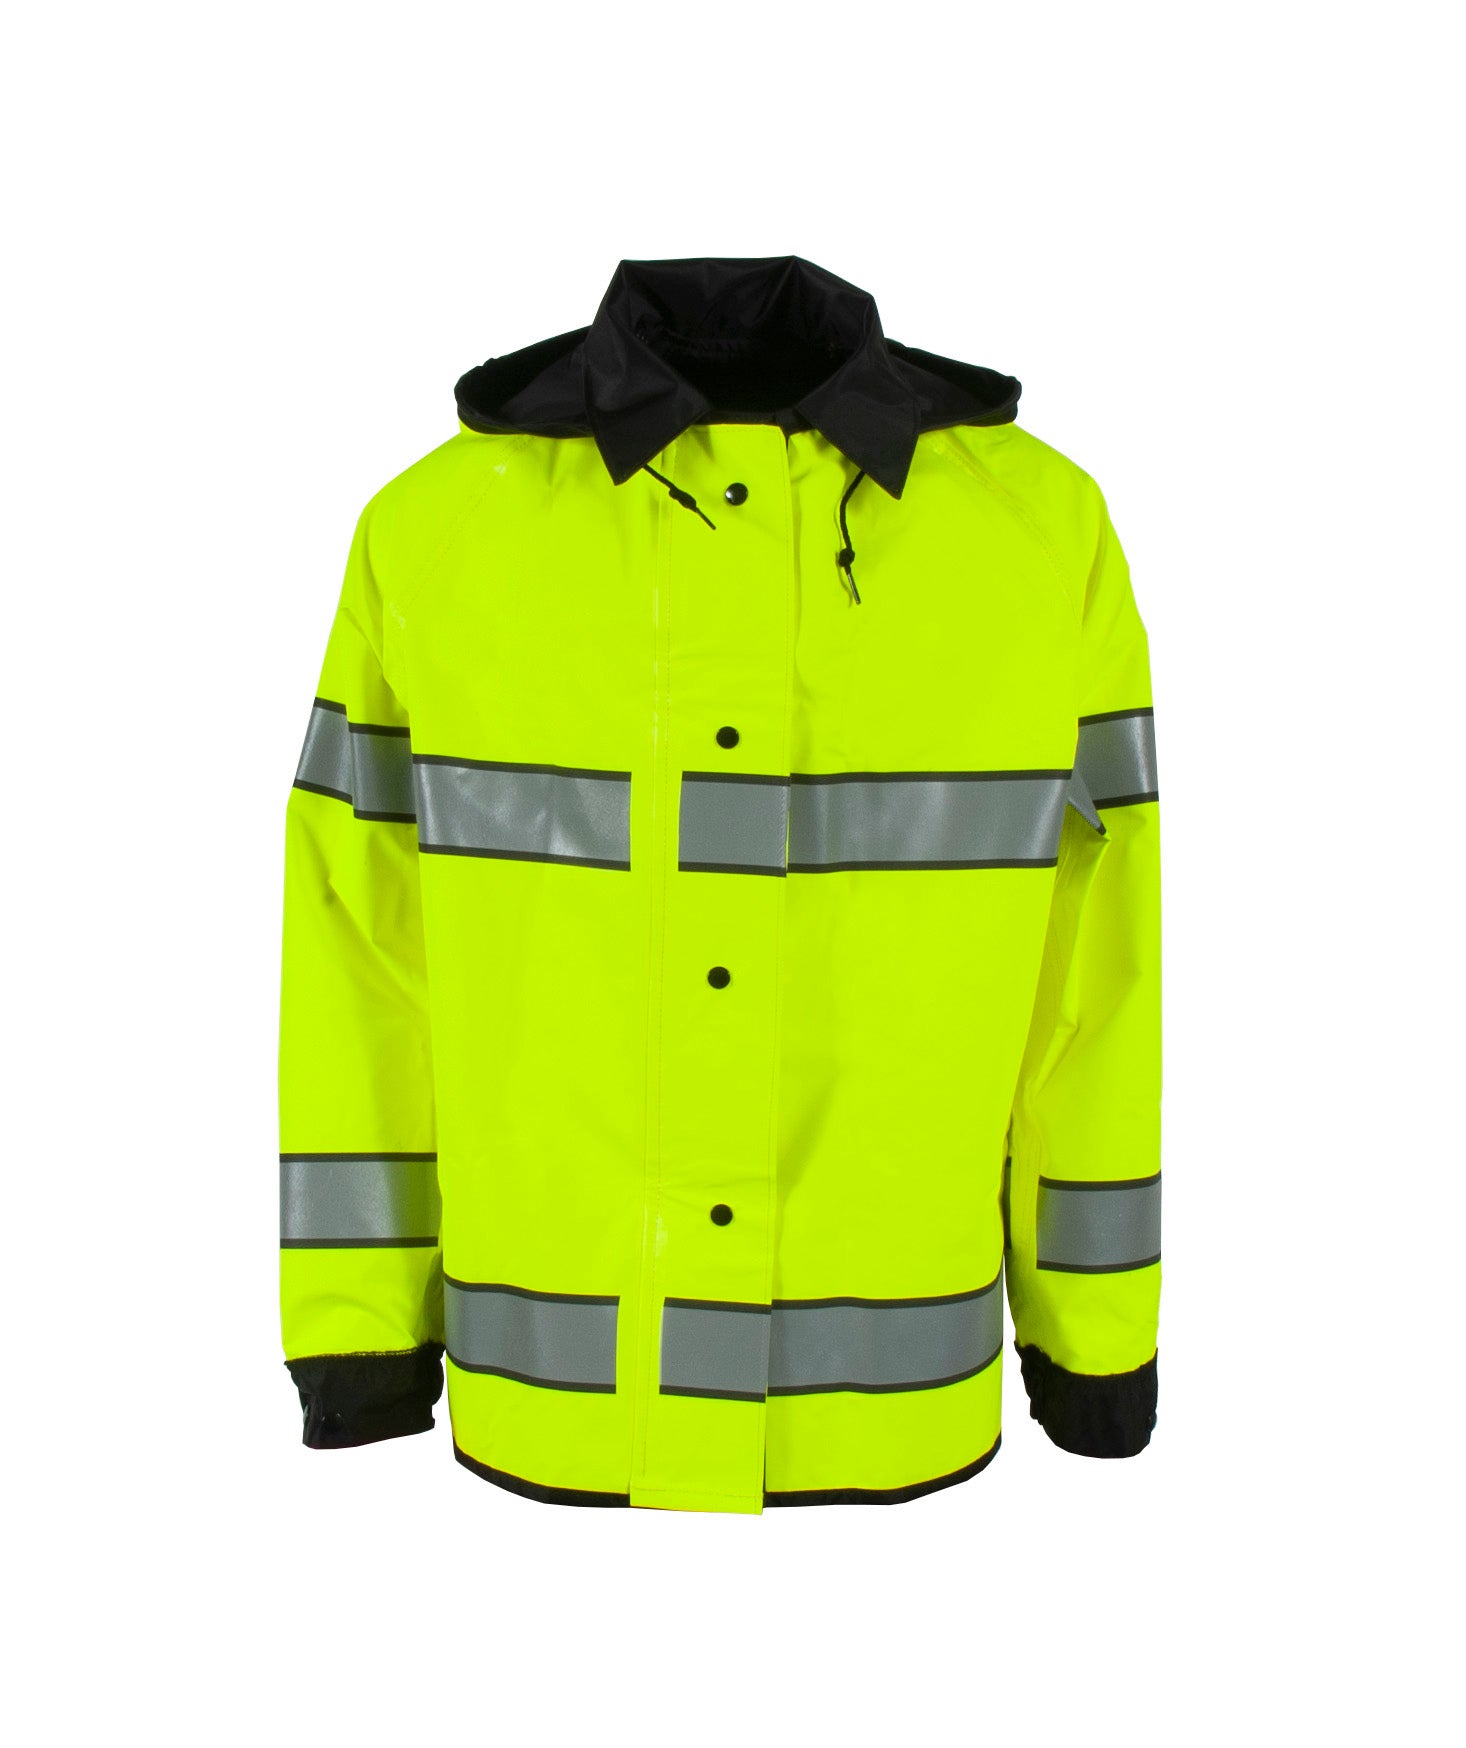 Neese 4703RJH3M Safe Officer Reversible Rain Jacket with Reflective Taping-eSafety Supplies, Inc